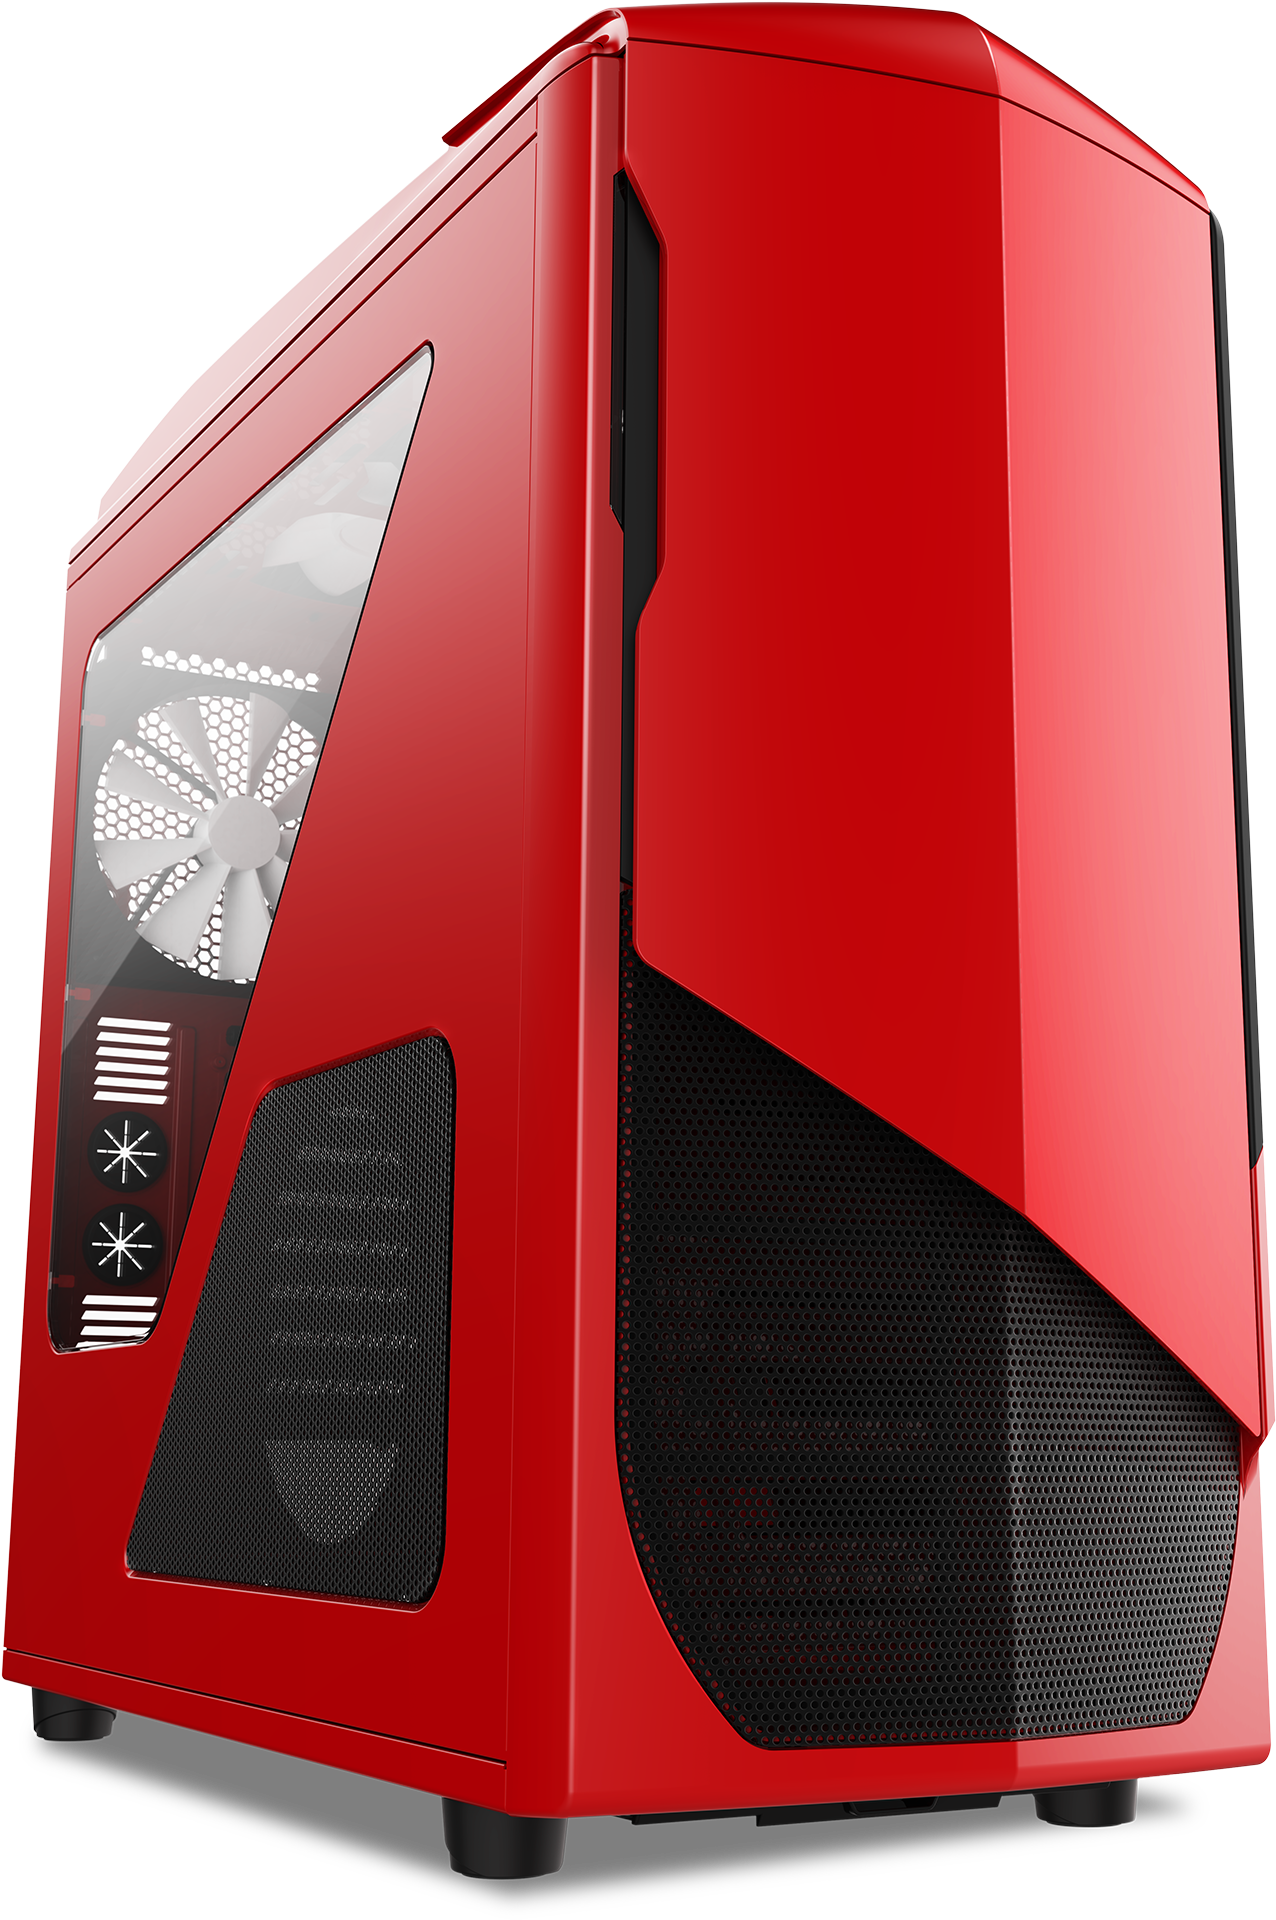 Hzzpqb9 33151 2 Bitfenix Launches The Phenom Another - Nzxt Phantom 530 Red Full Tower (2000x2000), Png Download